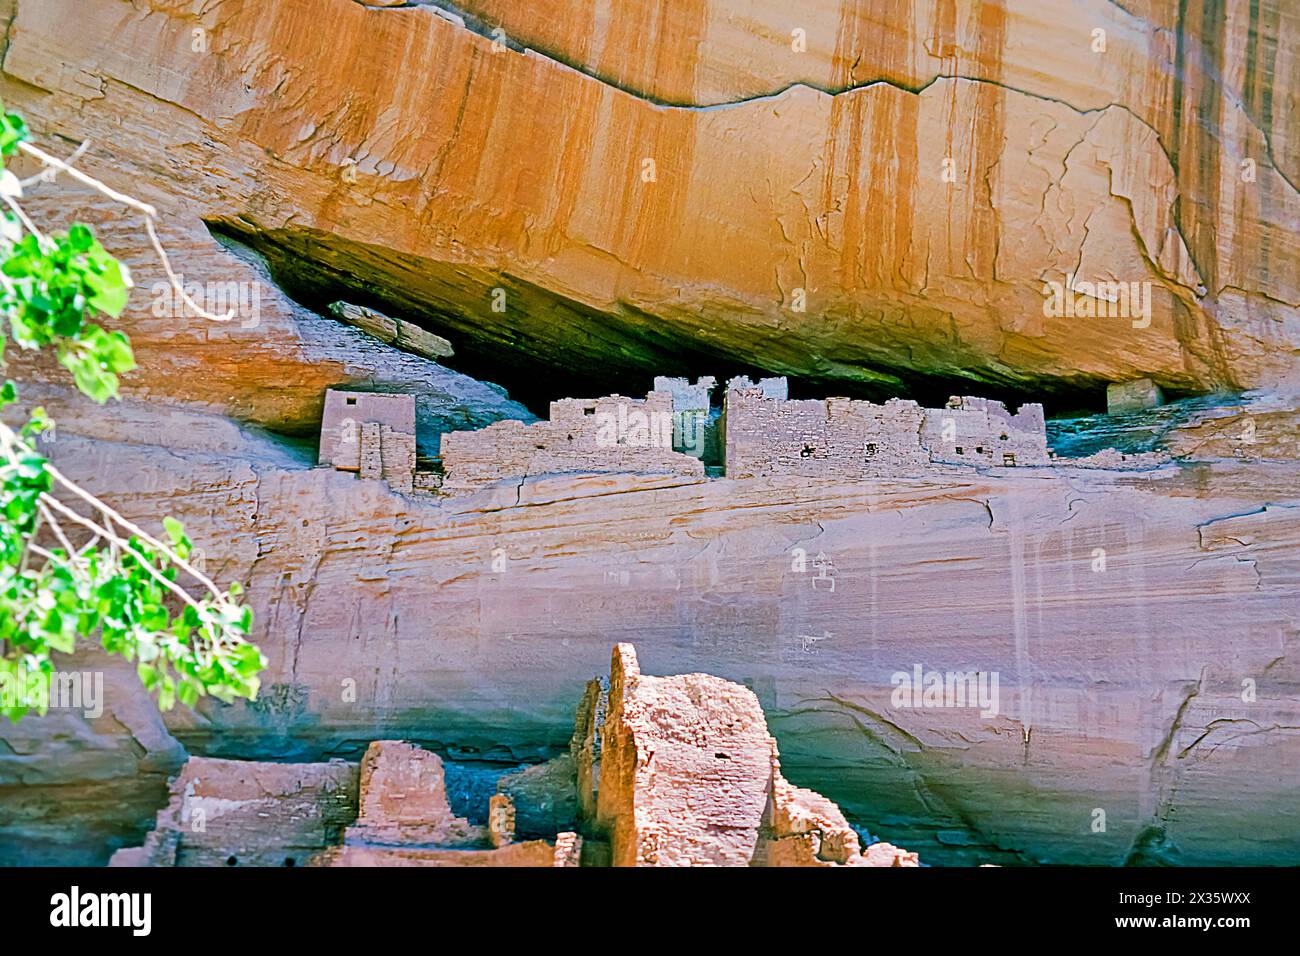 White House Ruin, settlement built 1000 years ago, early Pueblo culture, Canyon de Chelly National Monument, area of the Navajo Nation in the Stock Photo